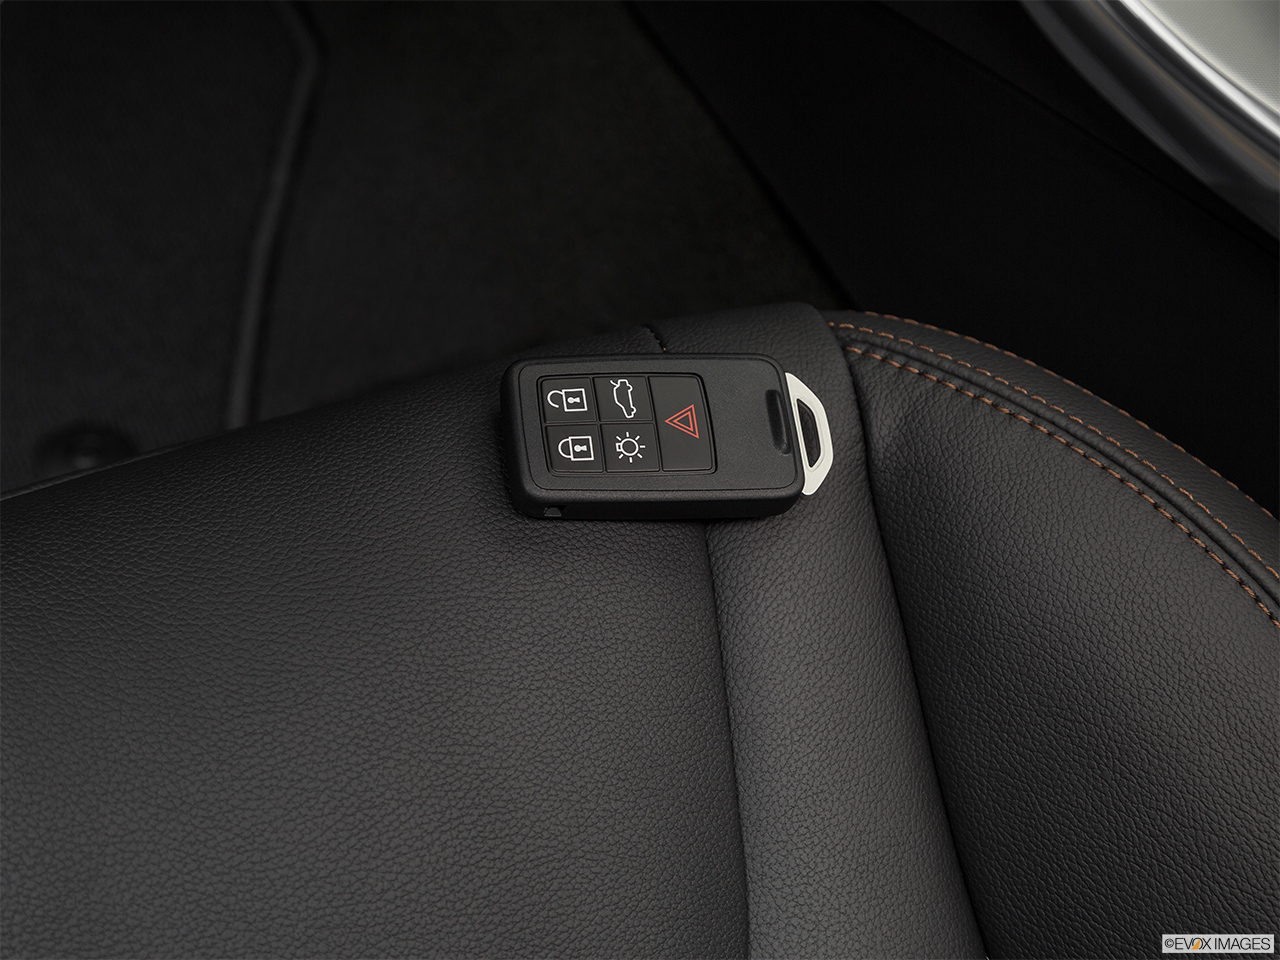 2018 Volvo V60 Cross Country T5 AWD Key fob on driver's seat. 